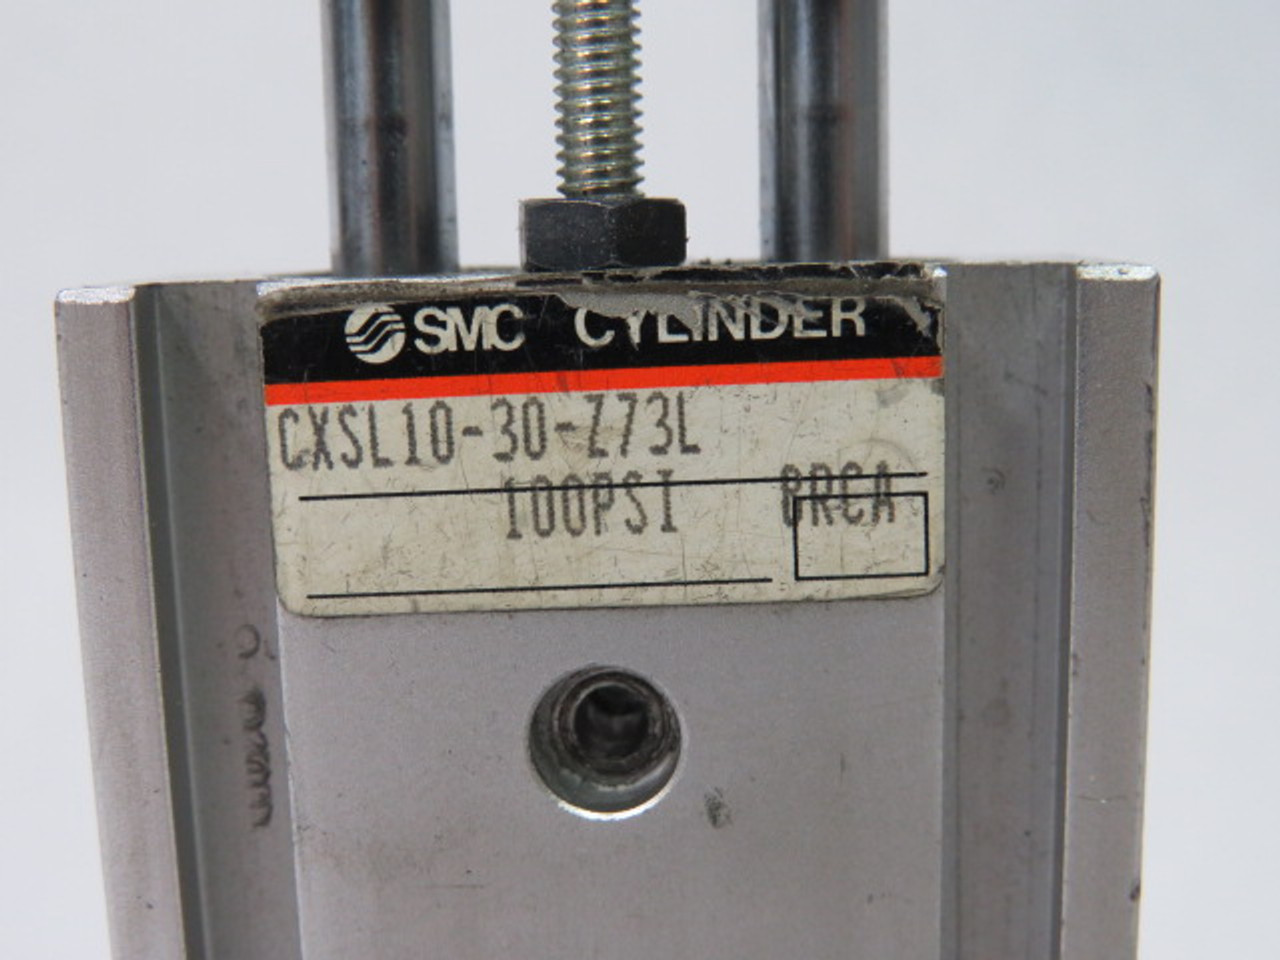 SMC CXSL10-30-Z73L Guided Cylinder 10mm Bore 30mm Stroke USED